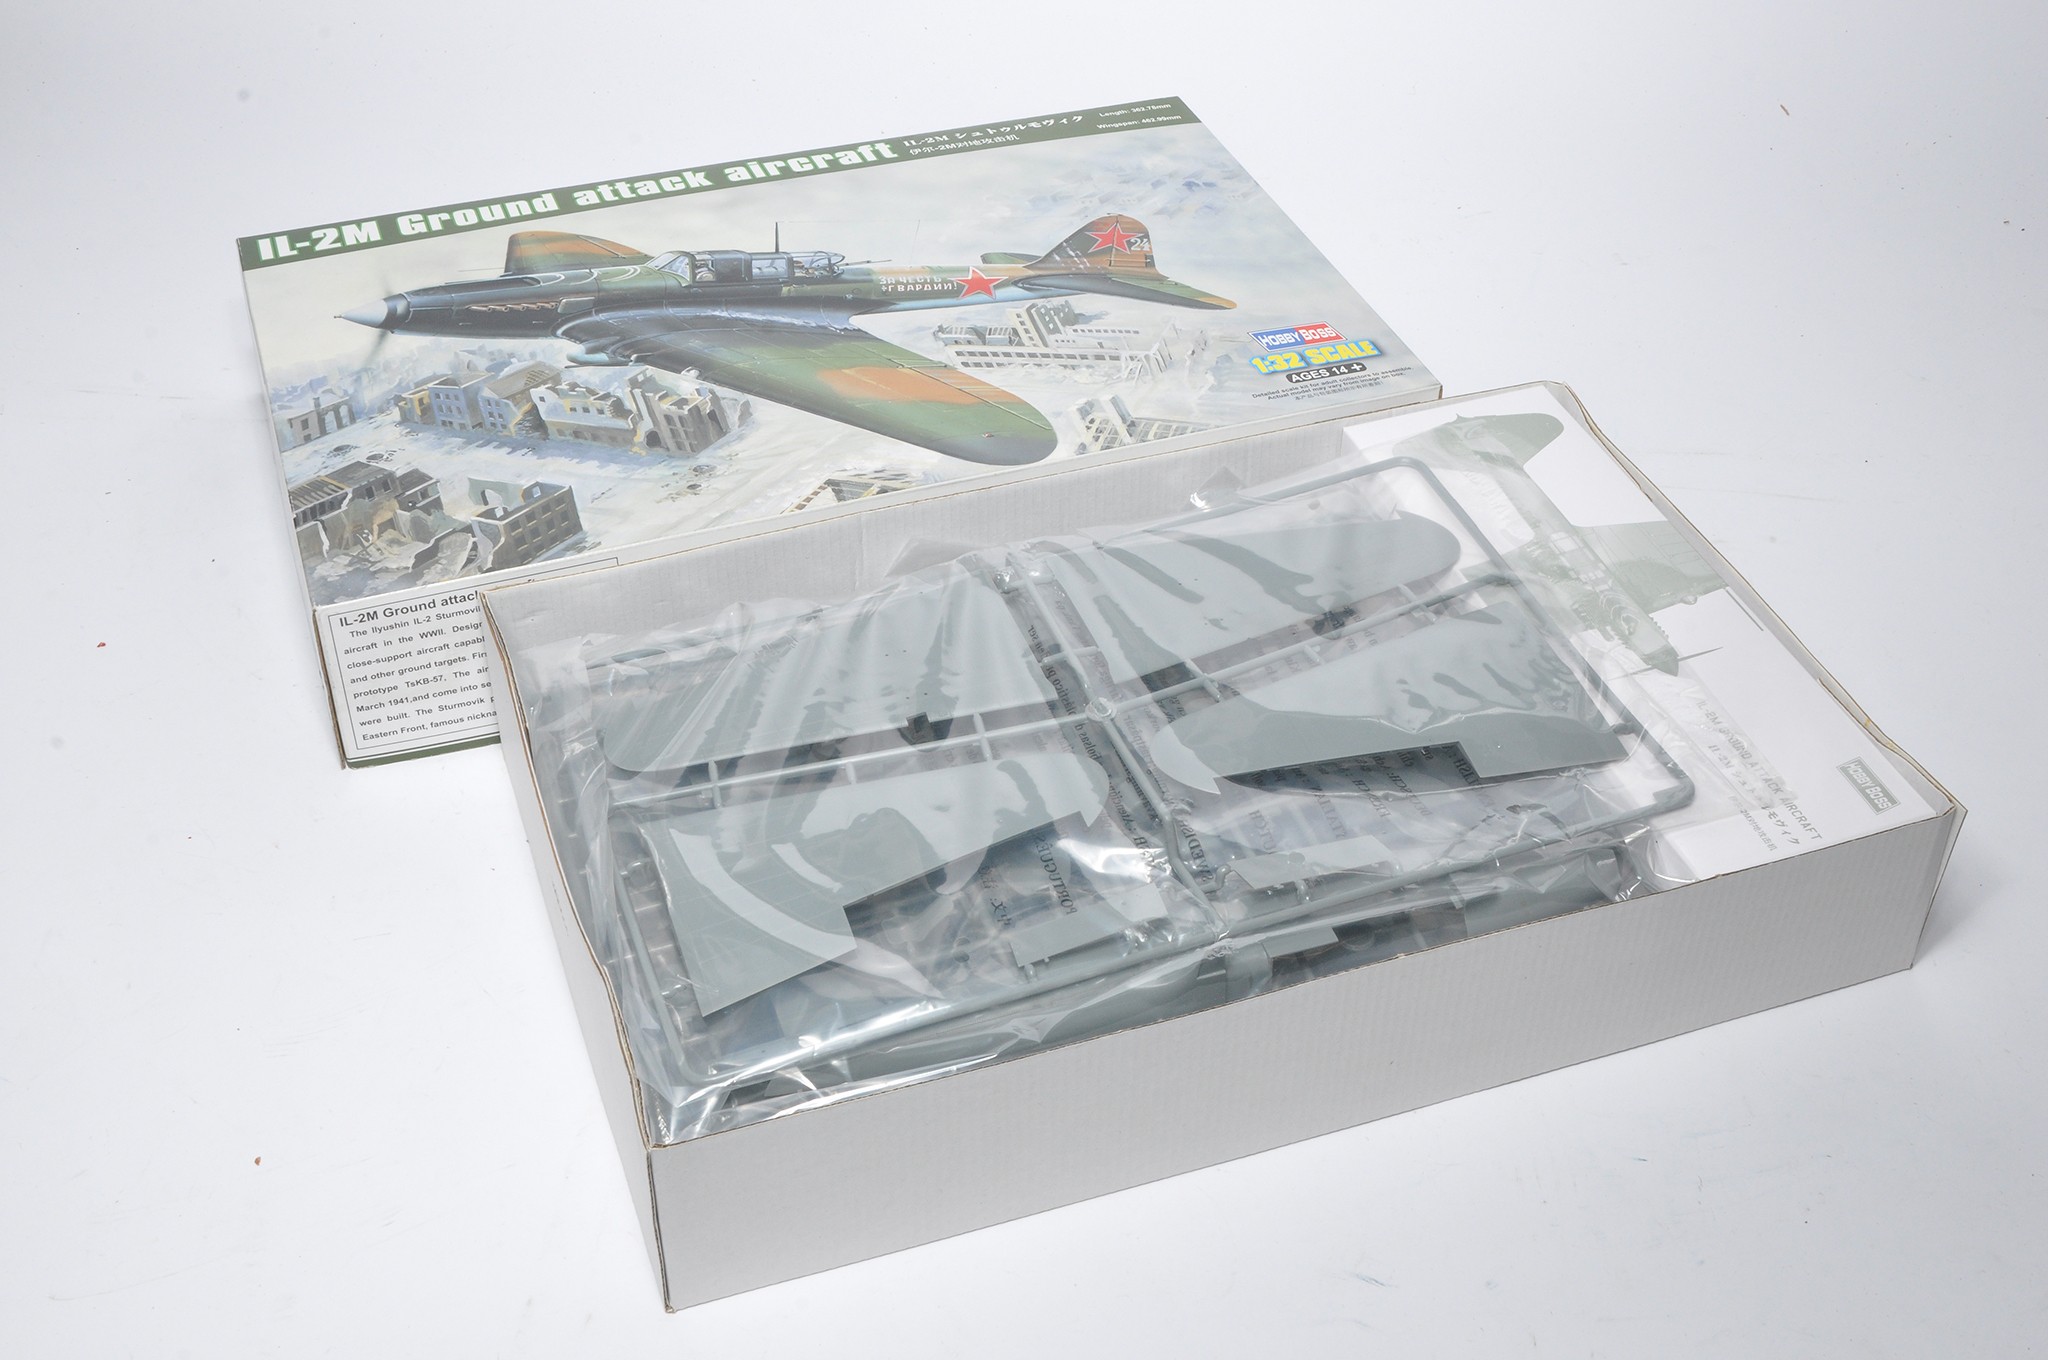 HobbyBoss 1/32 Plastic Model Kit IL-2M Ground Attack Aircraft, inner packaging sealed in good box.